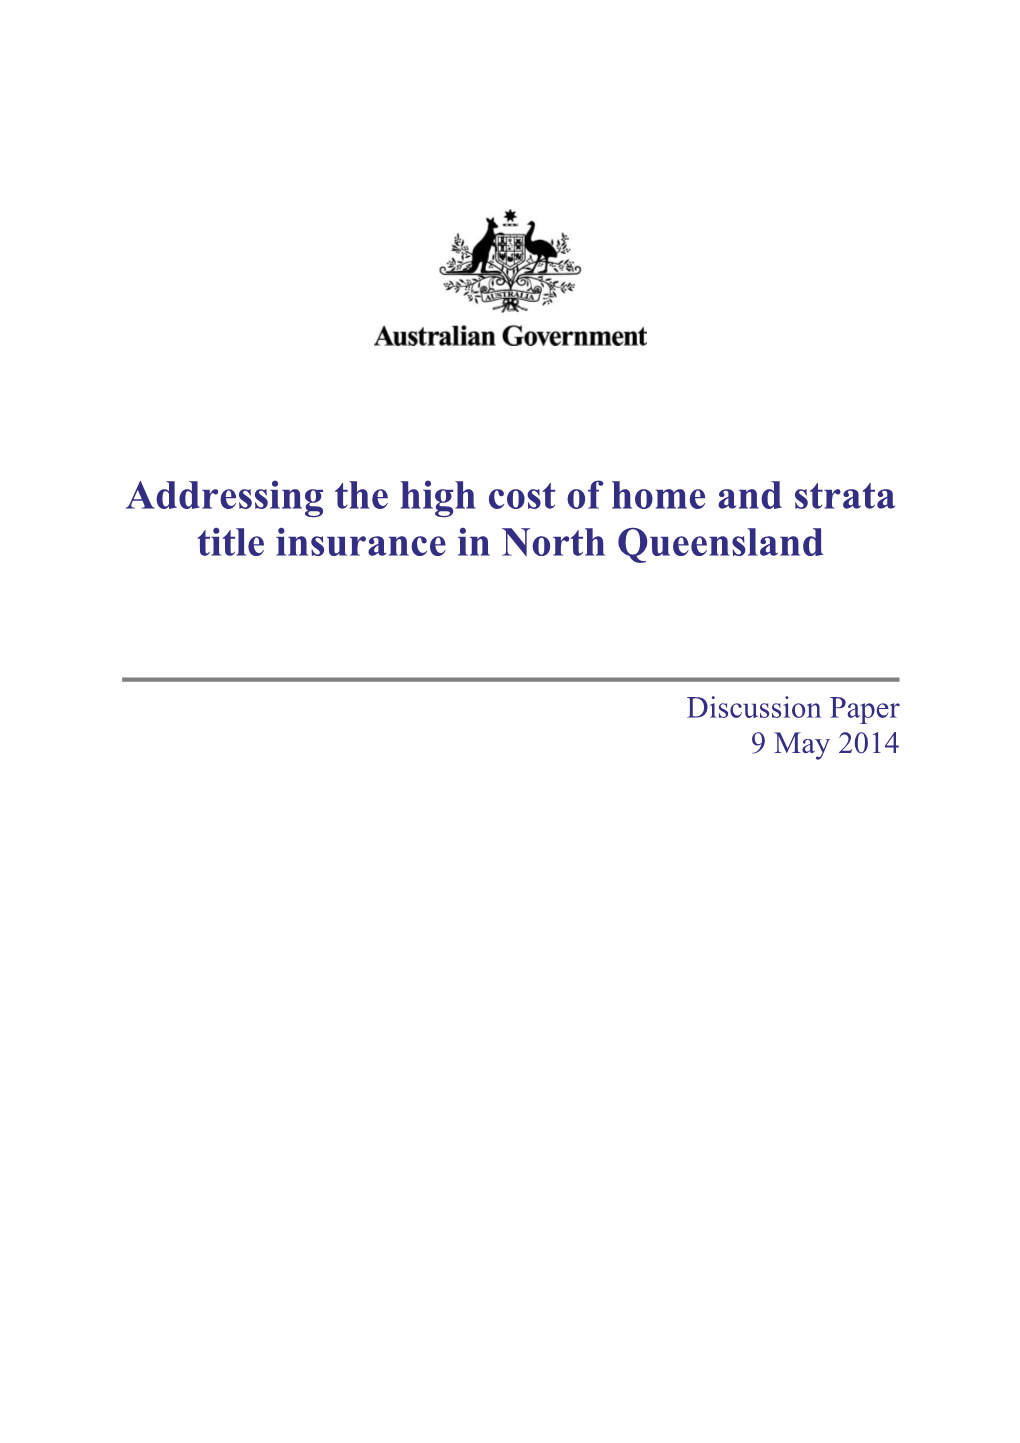 Addressing the High Cost of Home and Strata Title Insurance in North Queensland